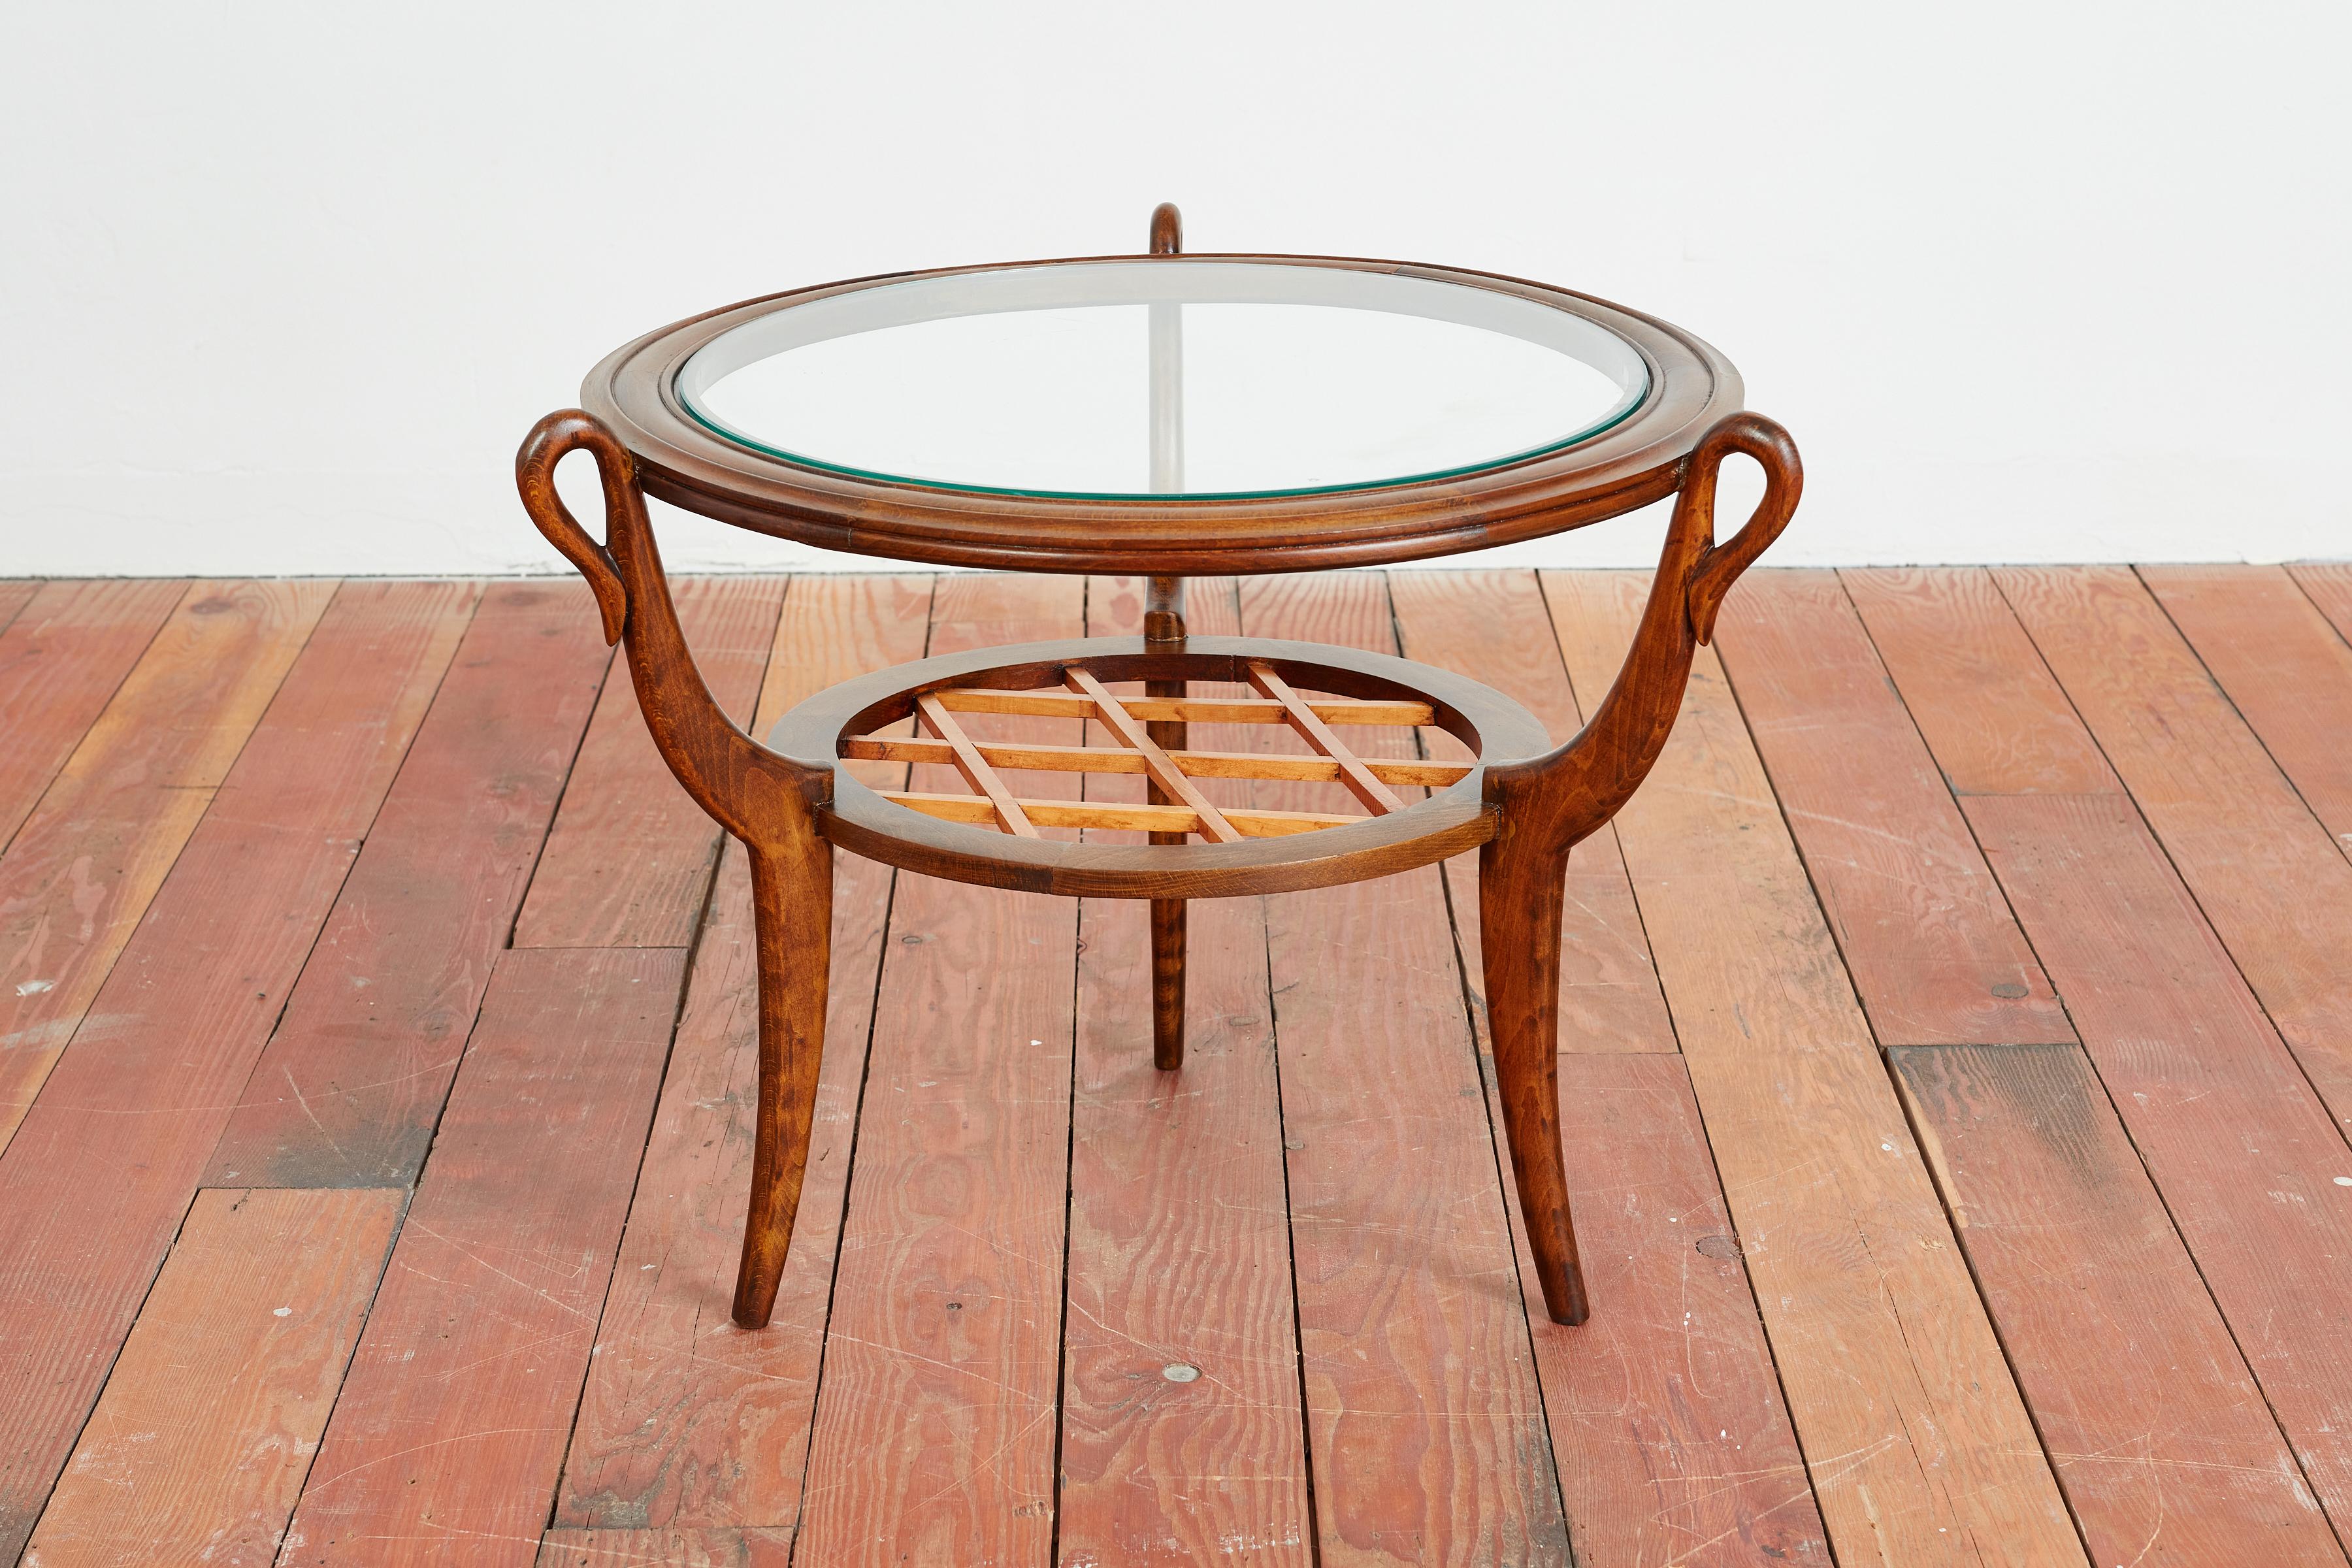 Elegant side table by Paolo Buffa - 
Italy, circa 1940s 
Constructed of walnut wood with woven wooden shelf, graceful curved legs and glass inlayed top. 
Circular loop detail where legs meet the top - wonderful detail 
